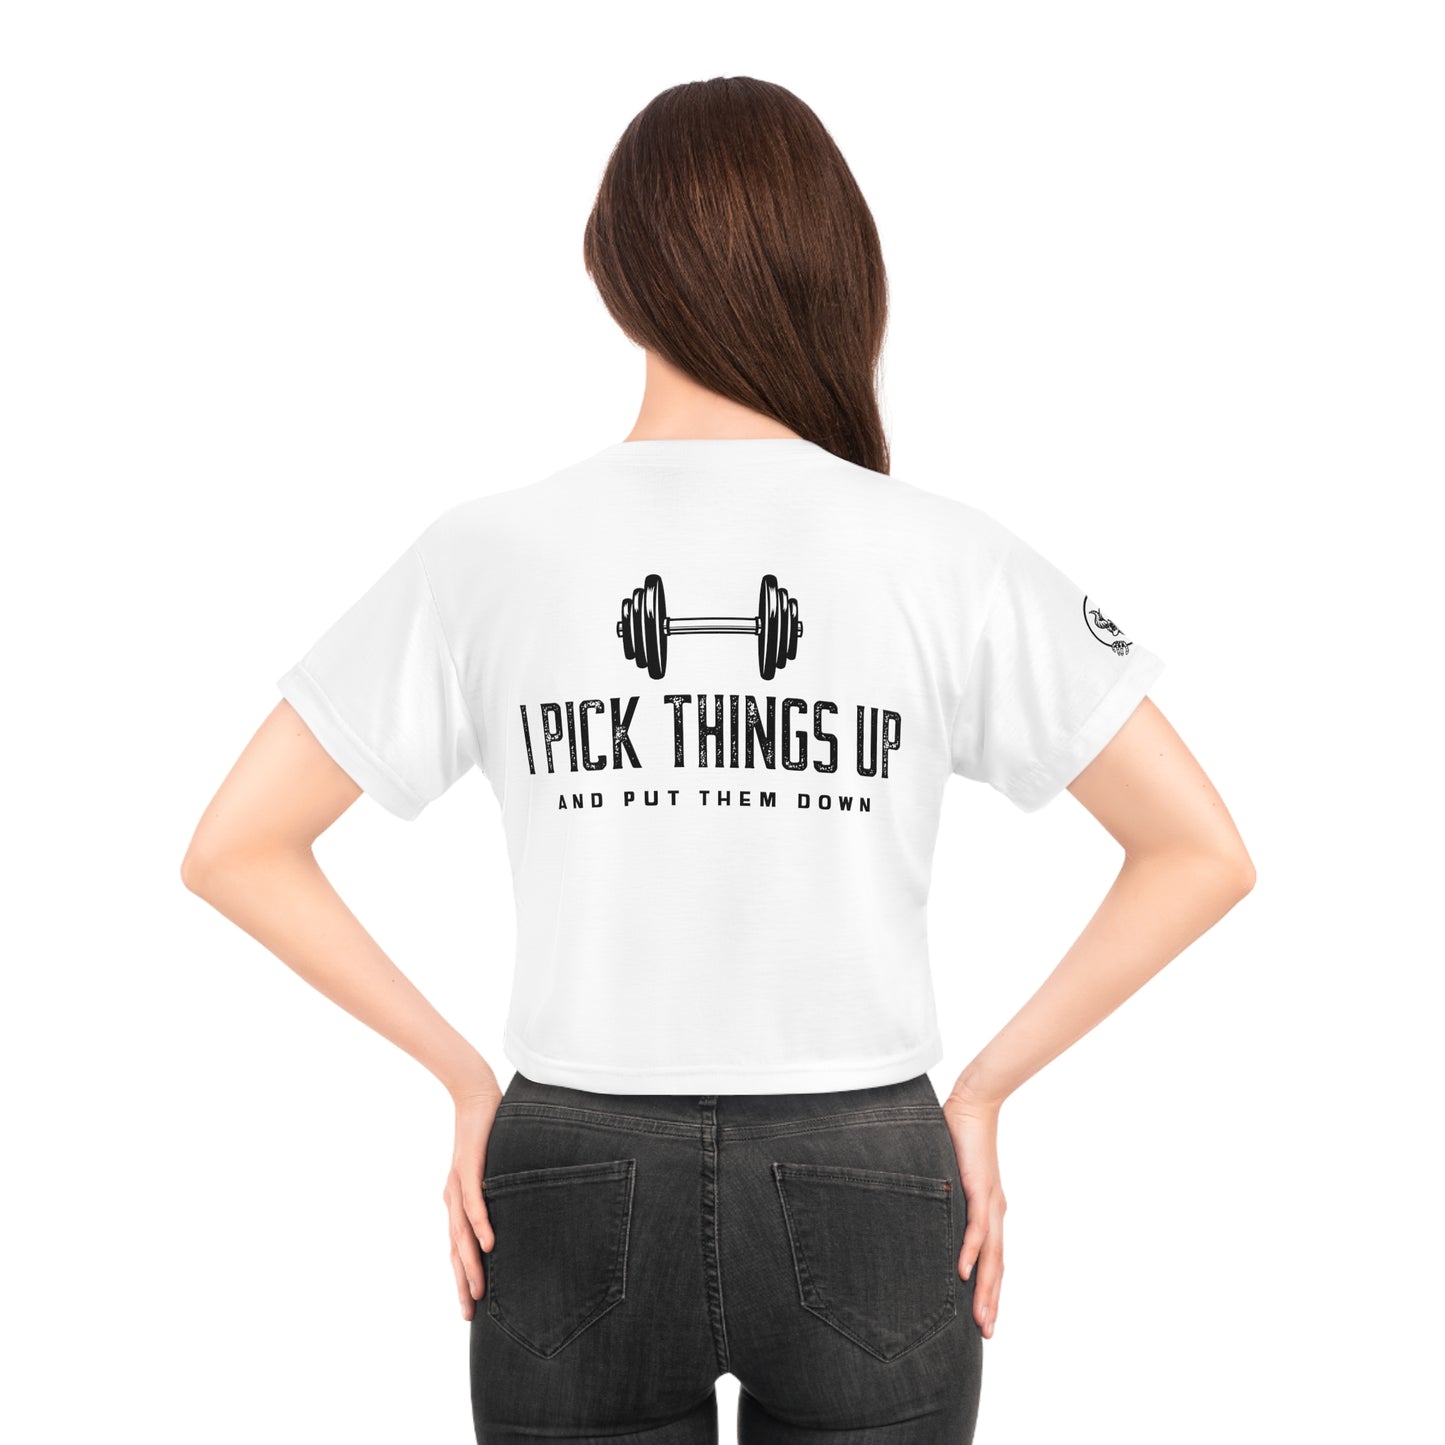 The "Strong Things" Crop Tee